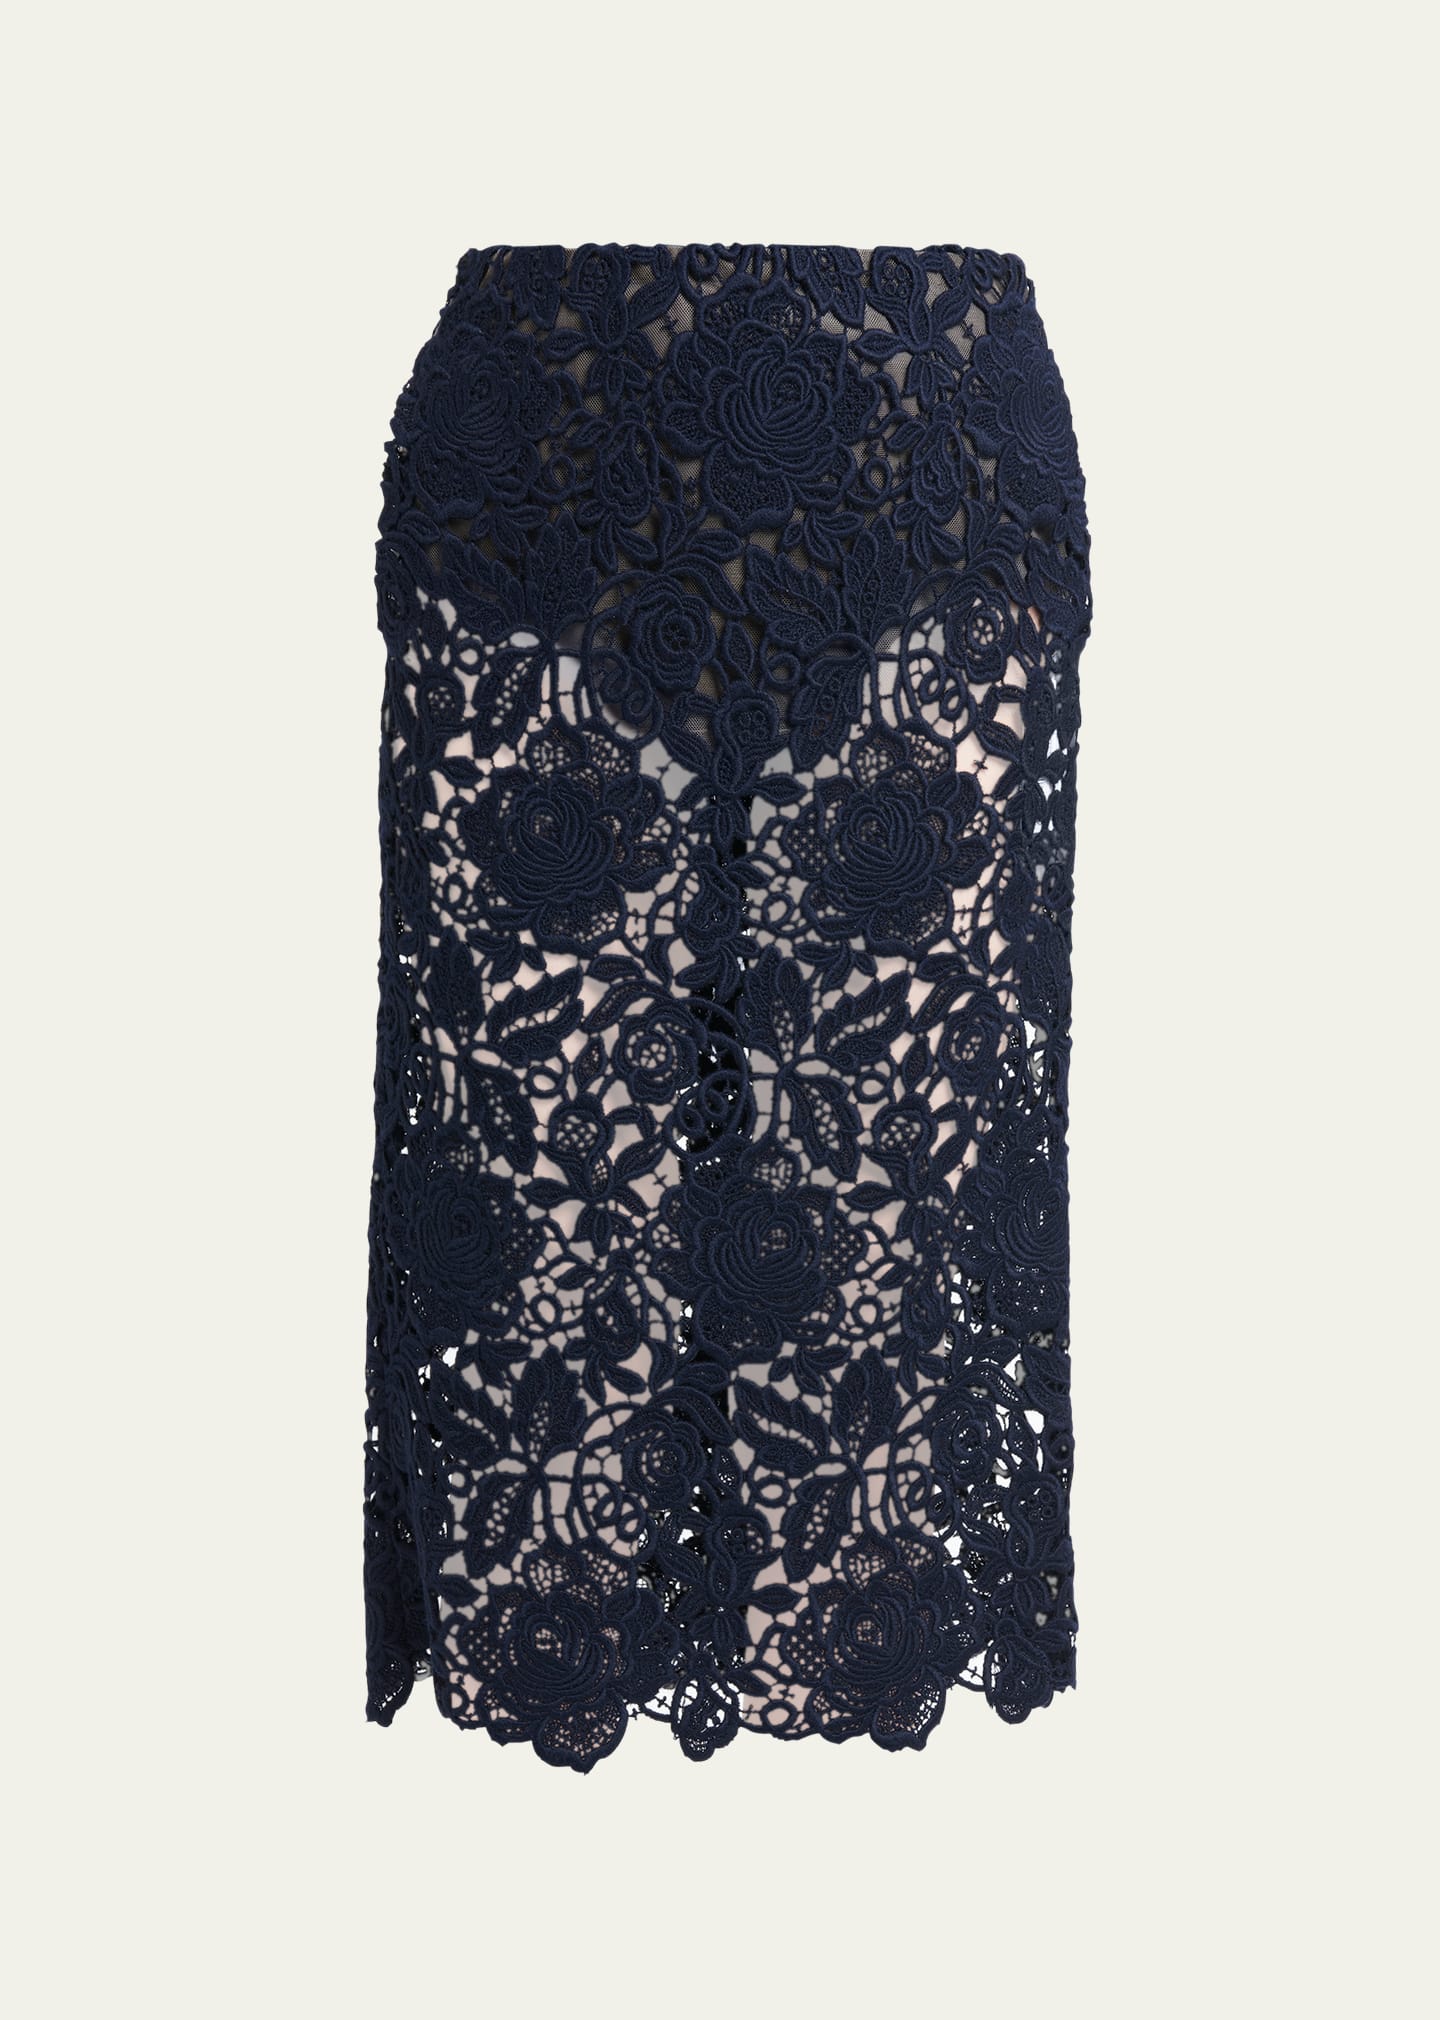 Valentino Floral Lace Sheer Pencil Skirt In Navy